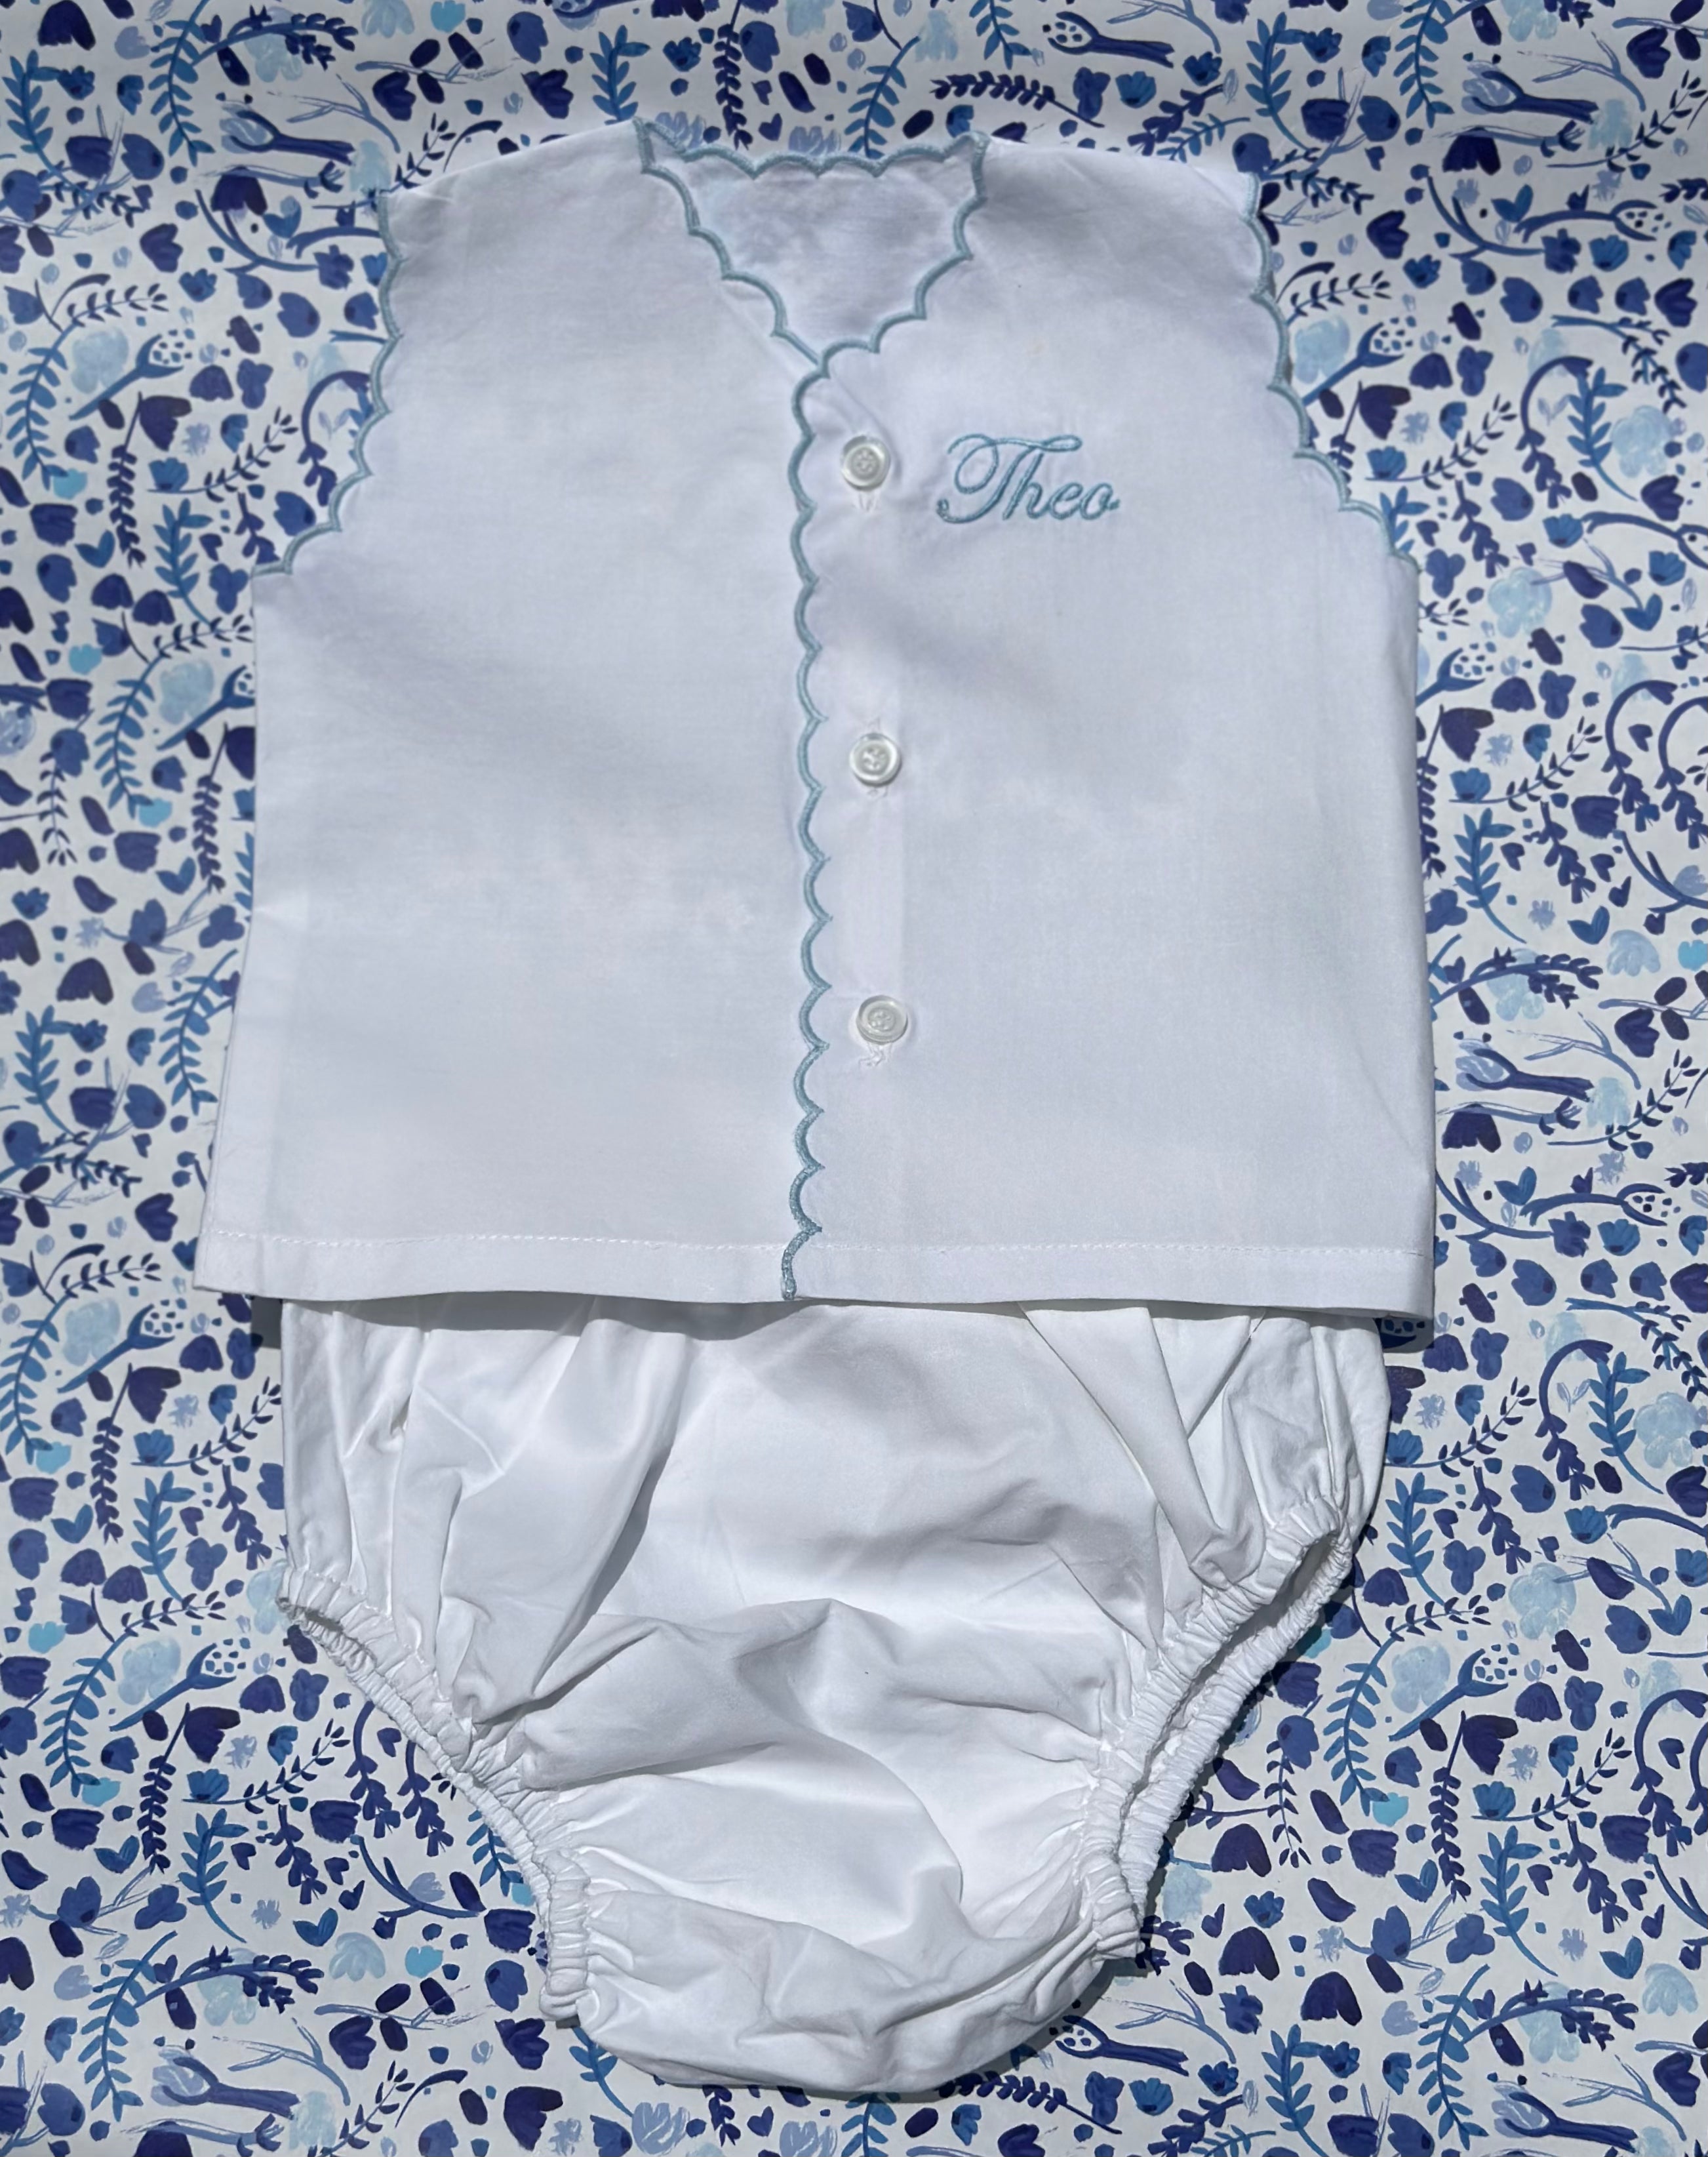 Diaper shirt and cover